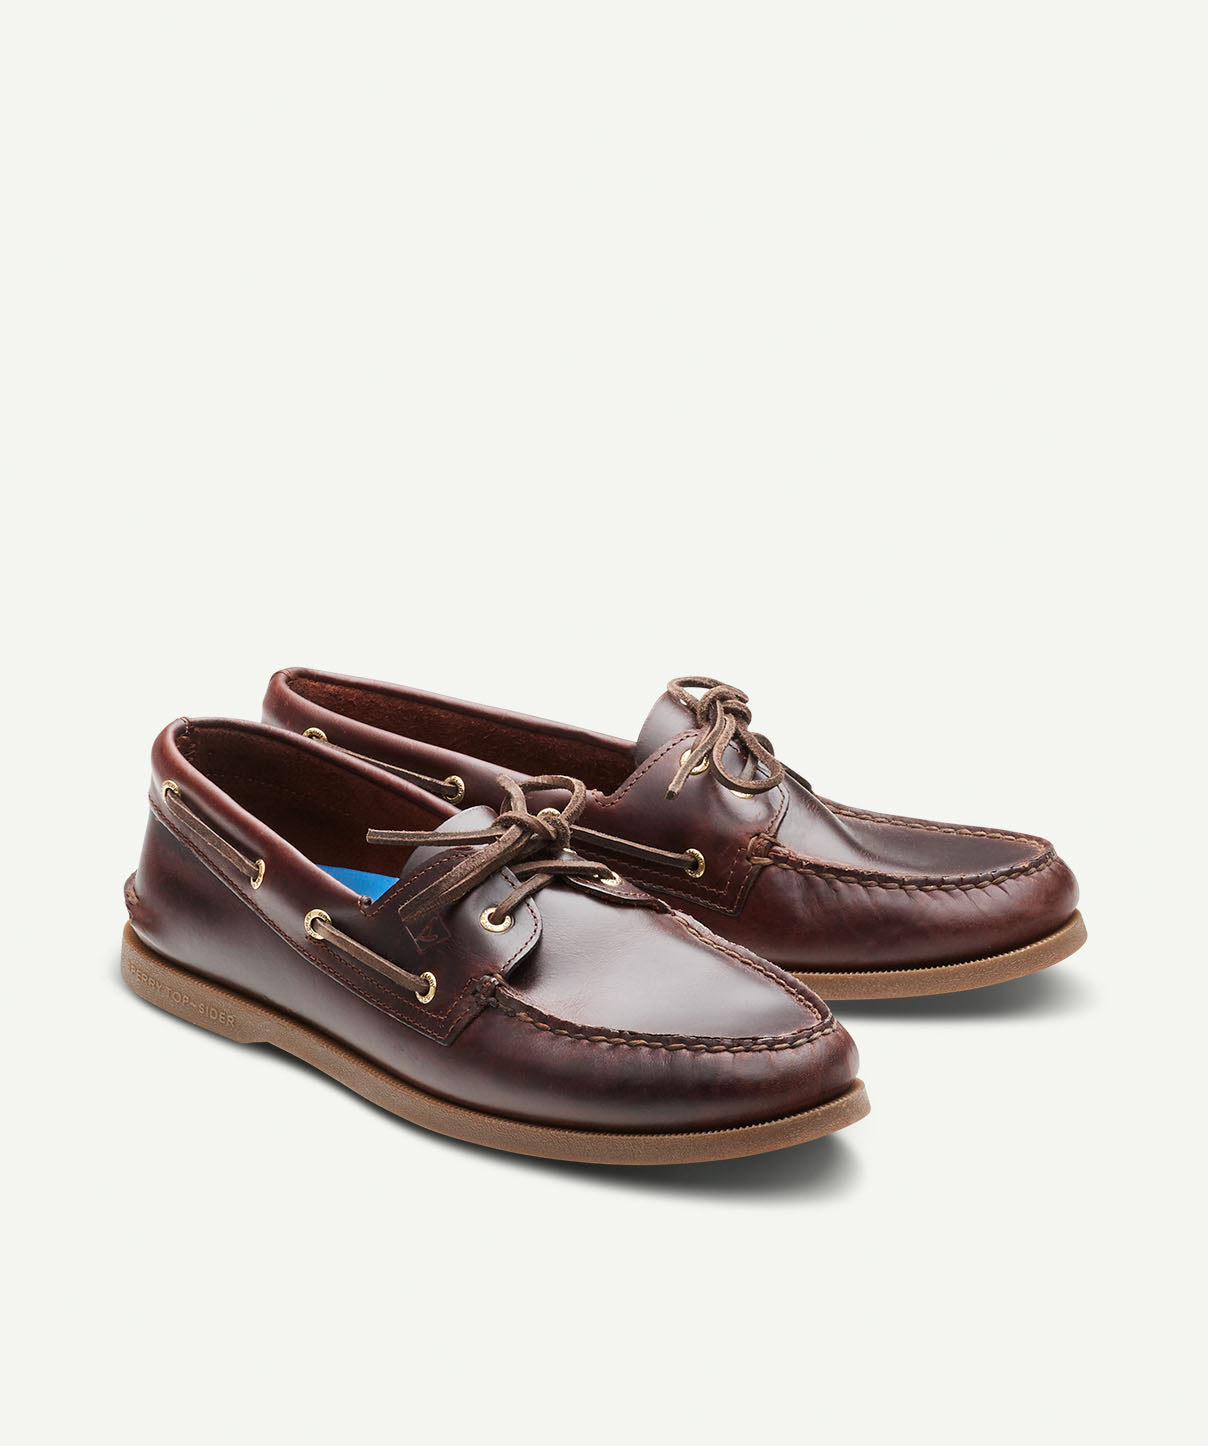 sperry shoes website